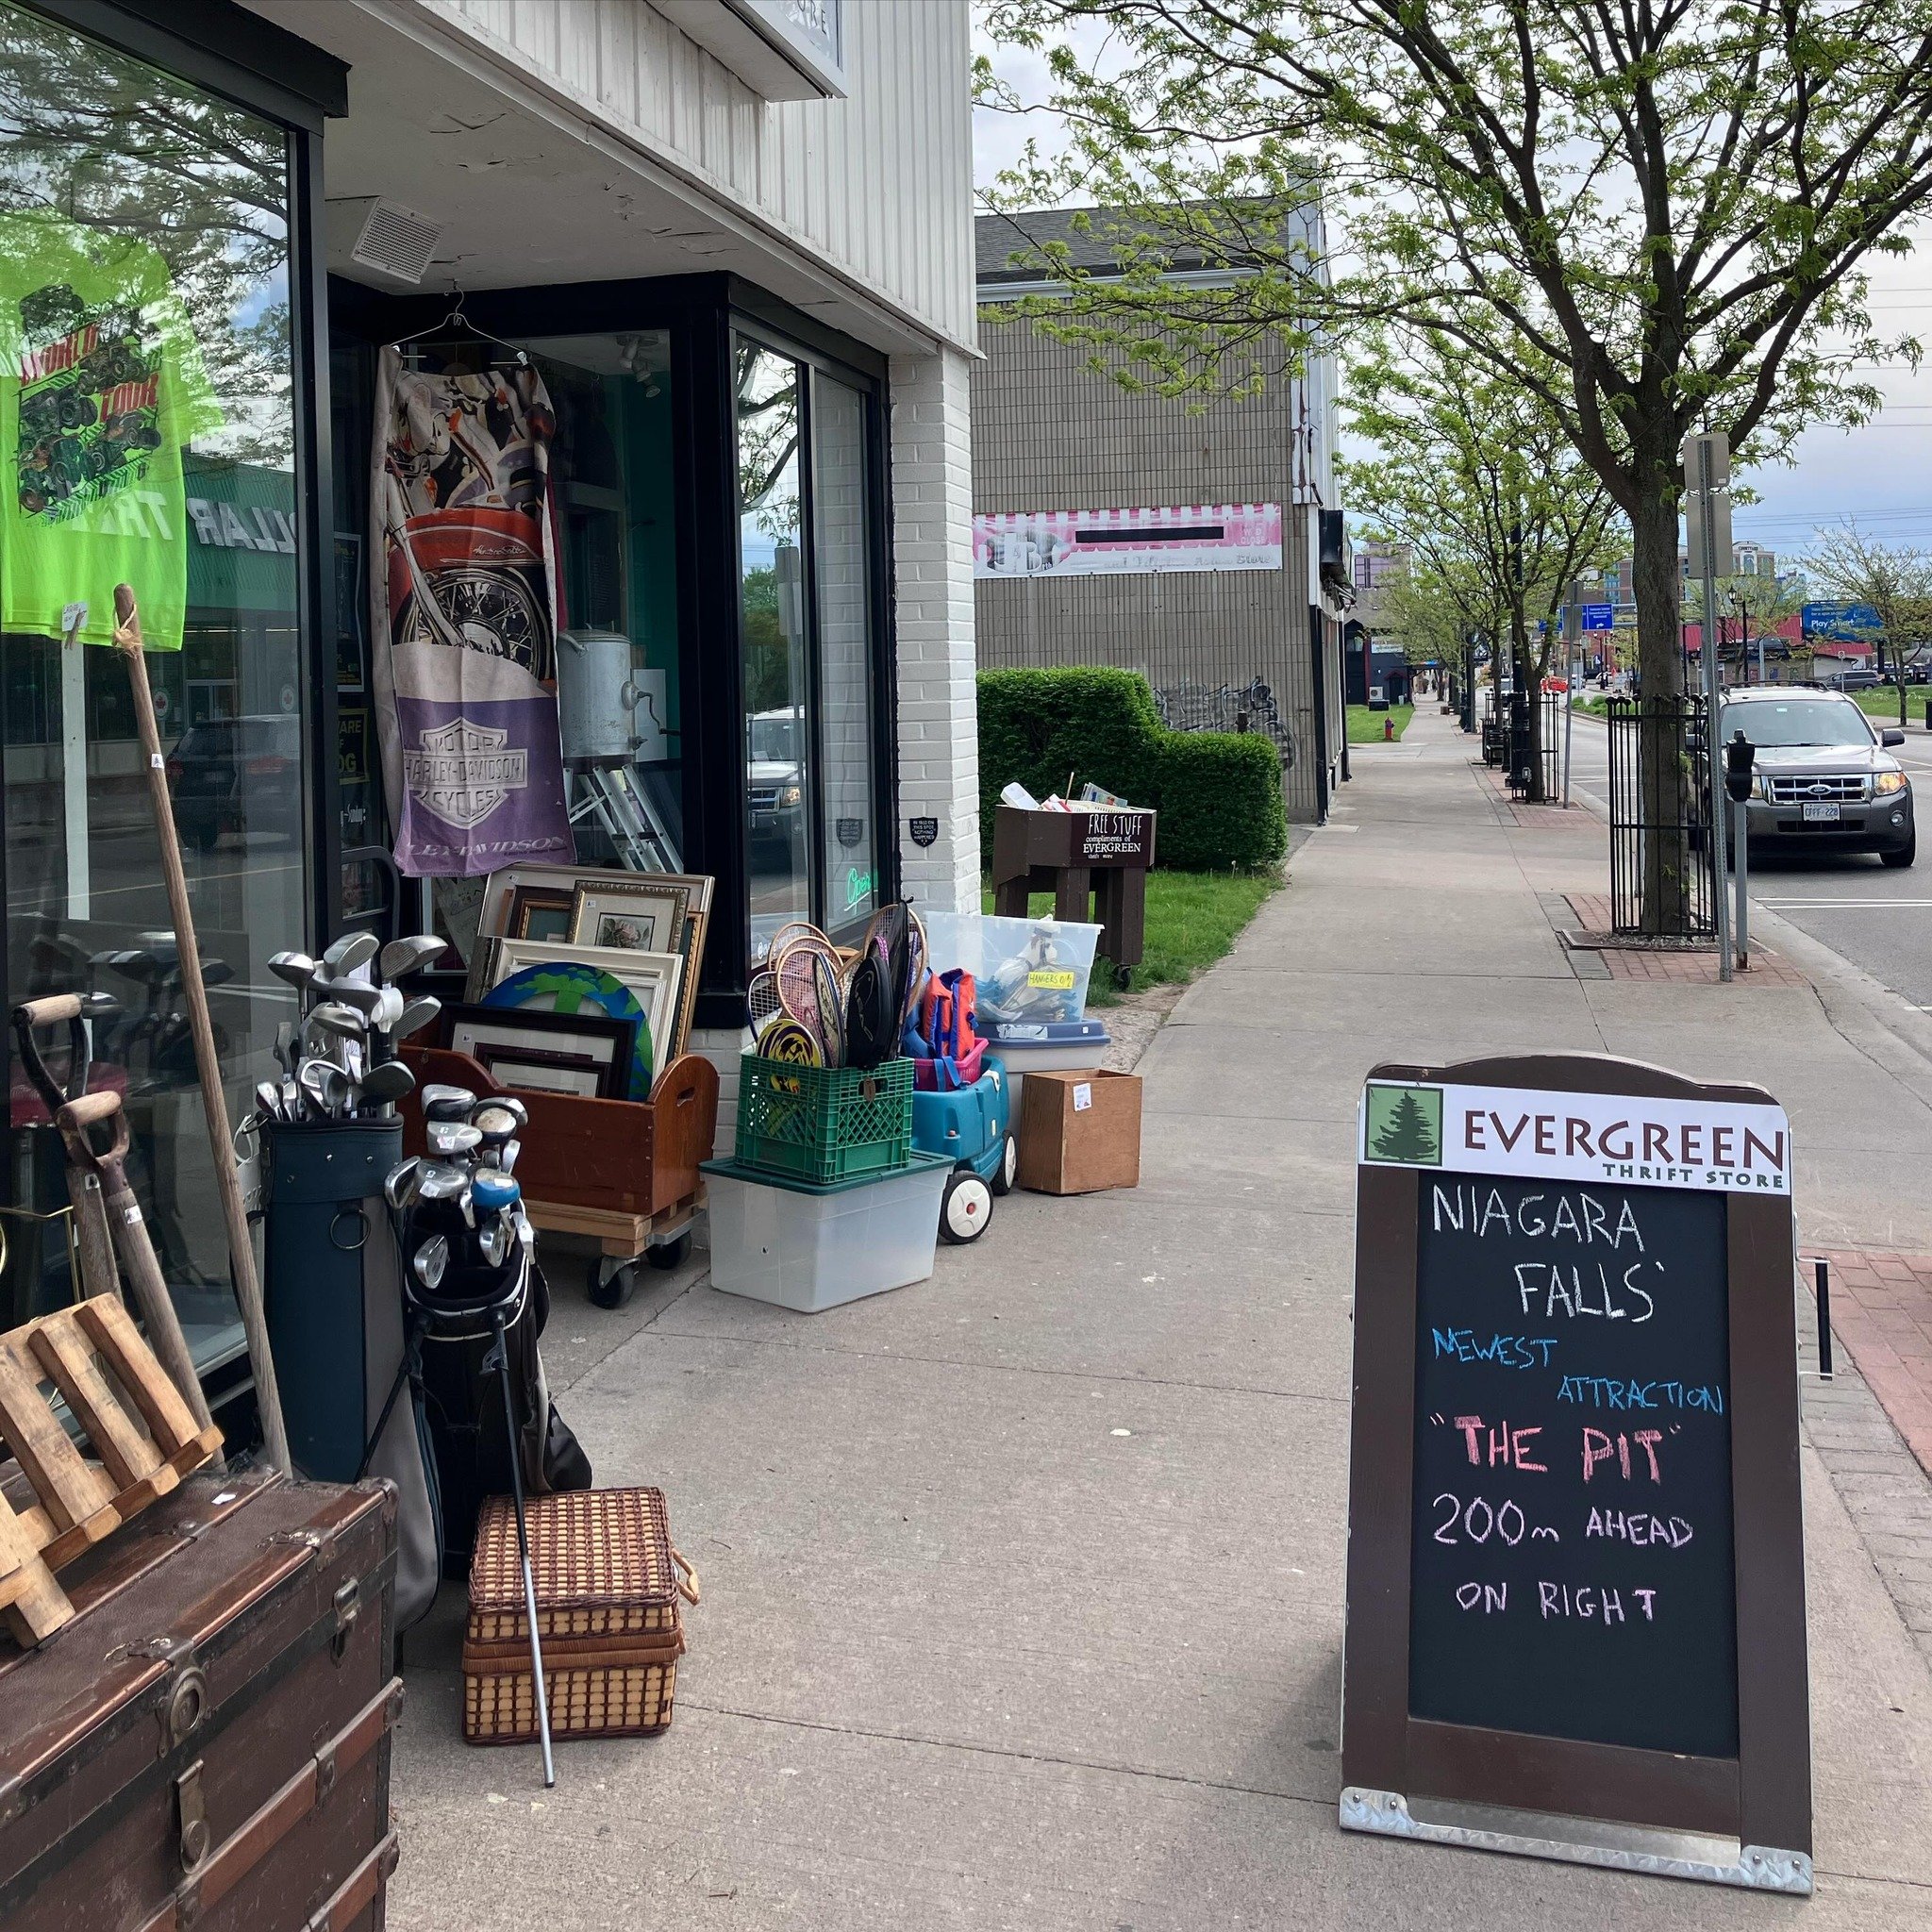 Visit our area of the city and get the chance to go thrift shopping and stare at a 40 foot deep hole in the ground.

What more could you want?

We&rsquo;re here until 6 pm today

🌲

#thriftstore #secondhand #shoplocal #niagarafalls